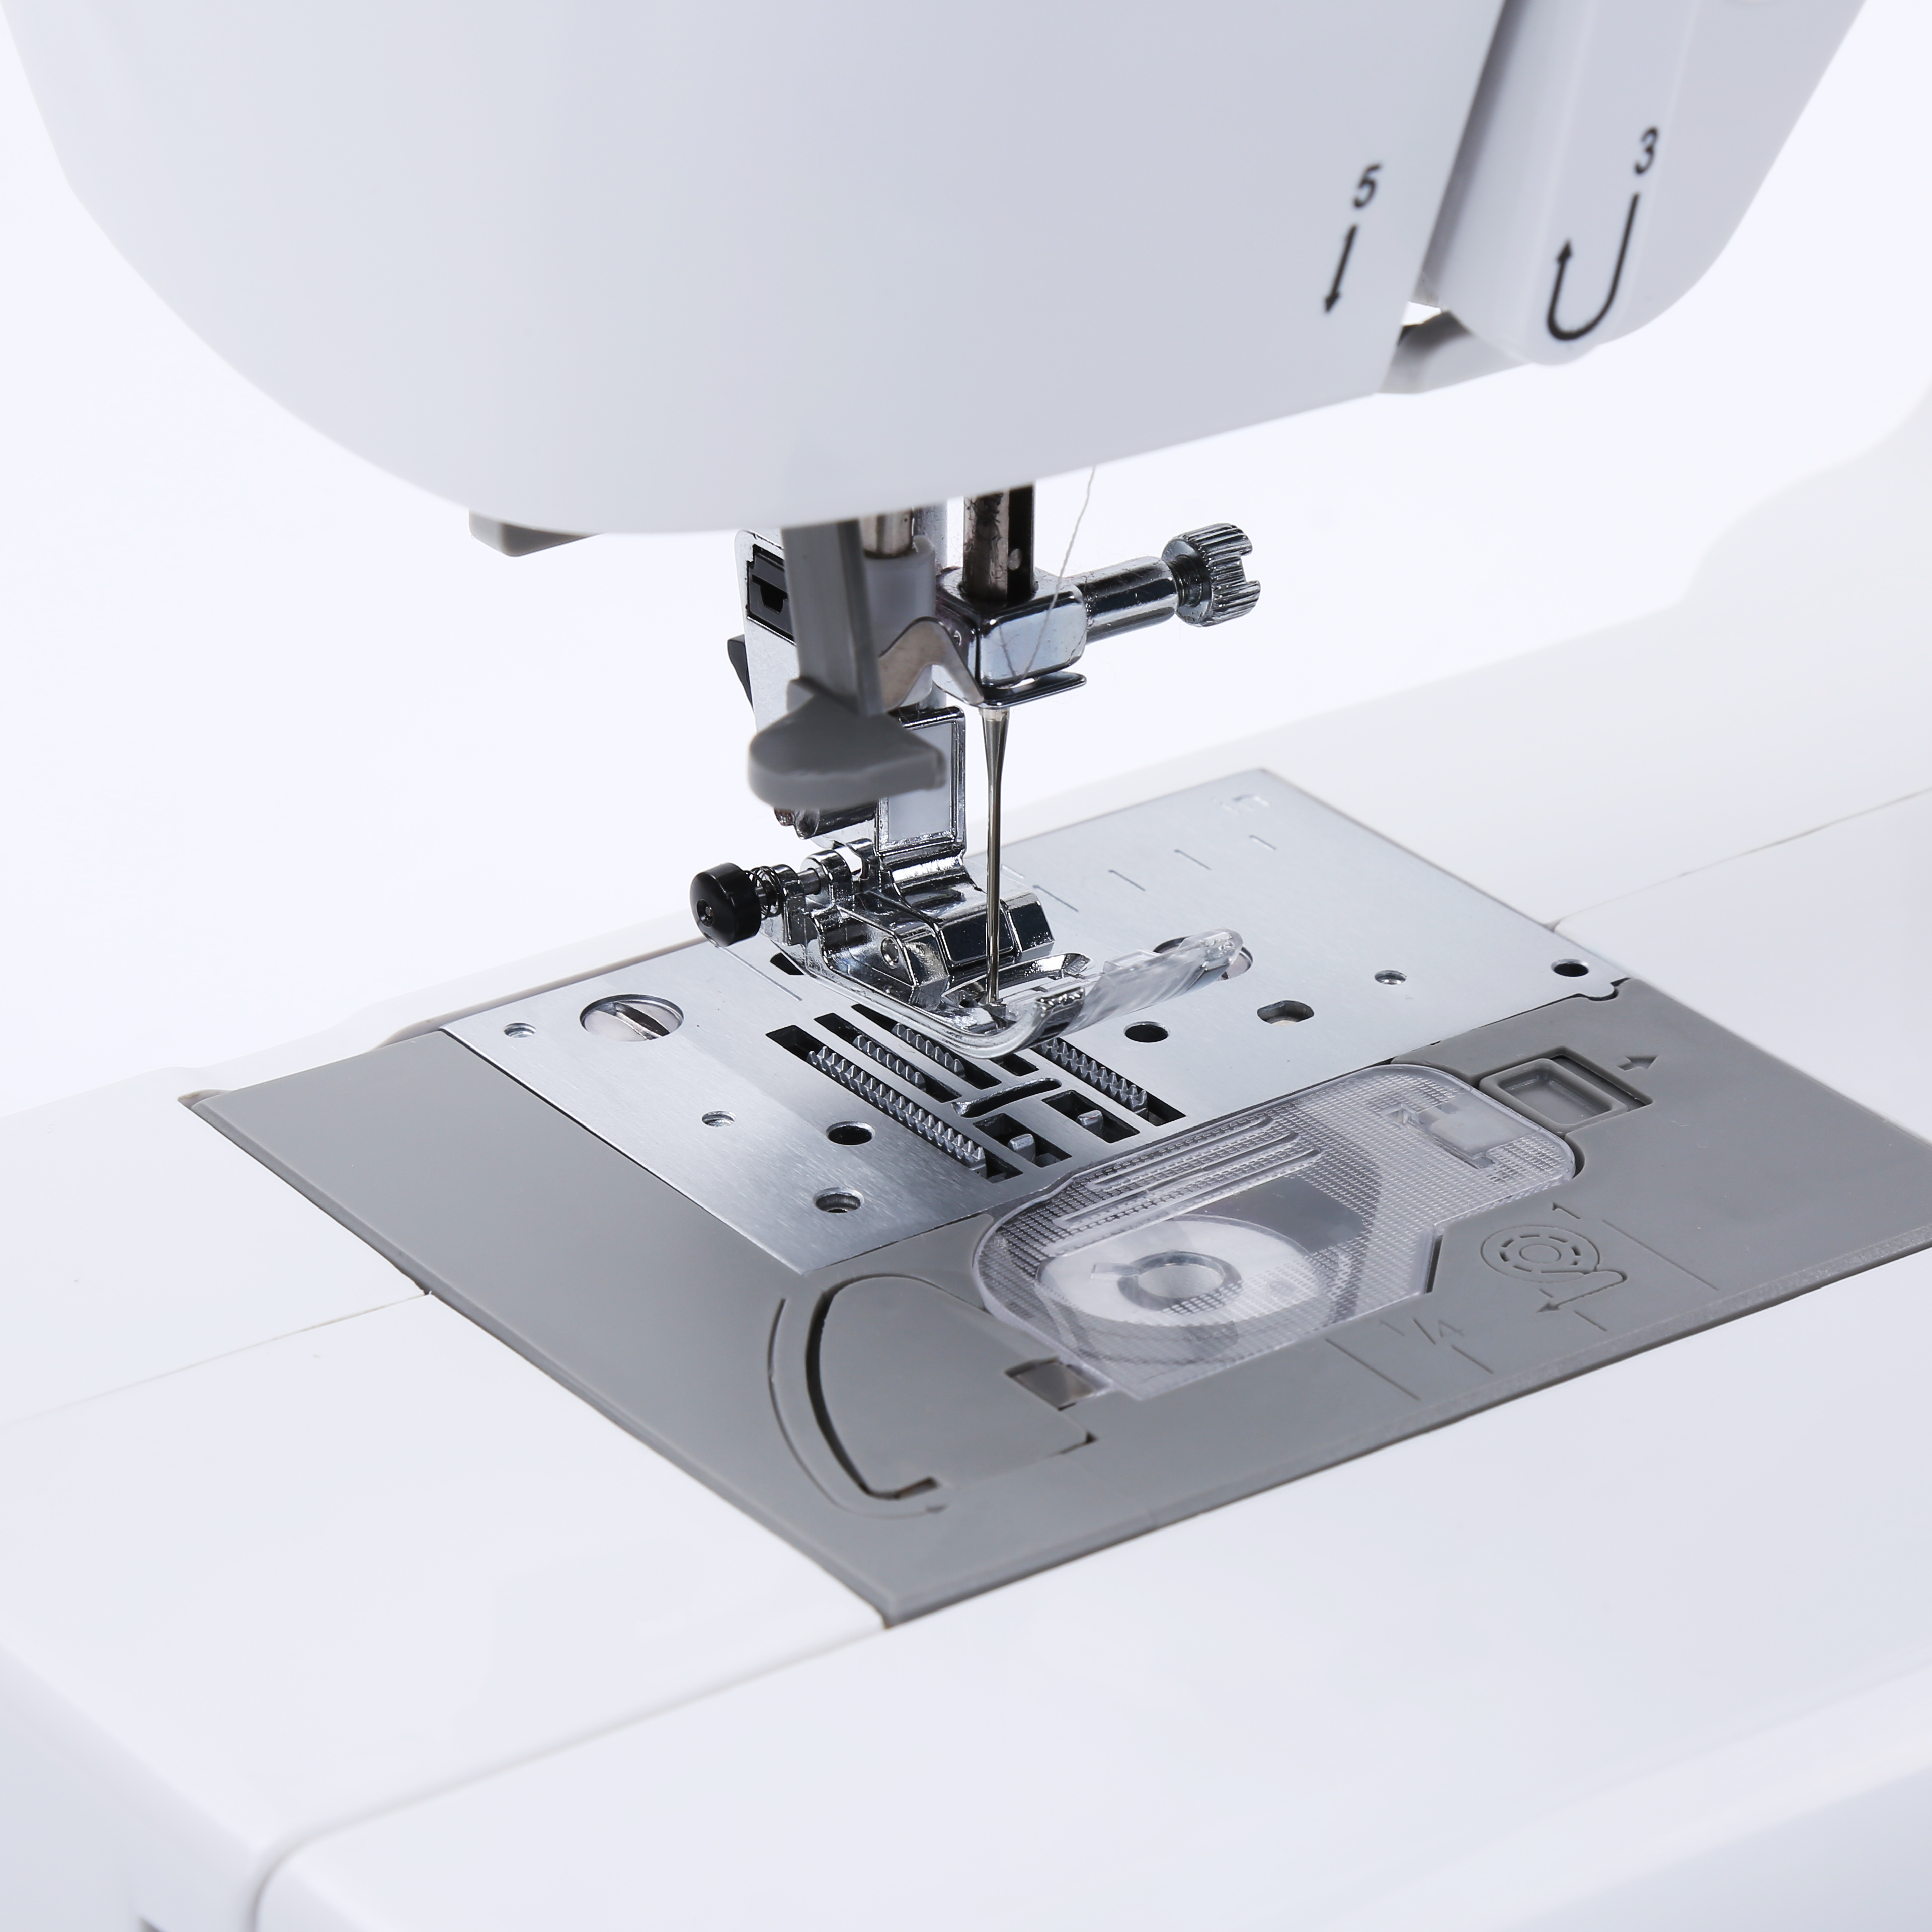 BAI Sewing Machinery Spare Parts in Japan for Folder Binder for Sewing Machines